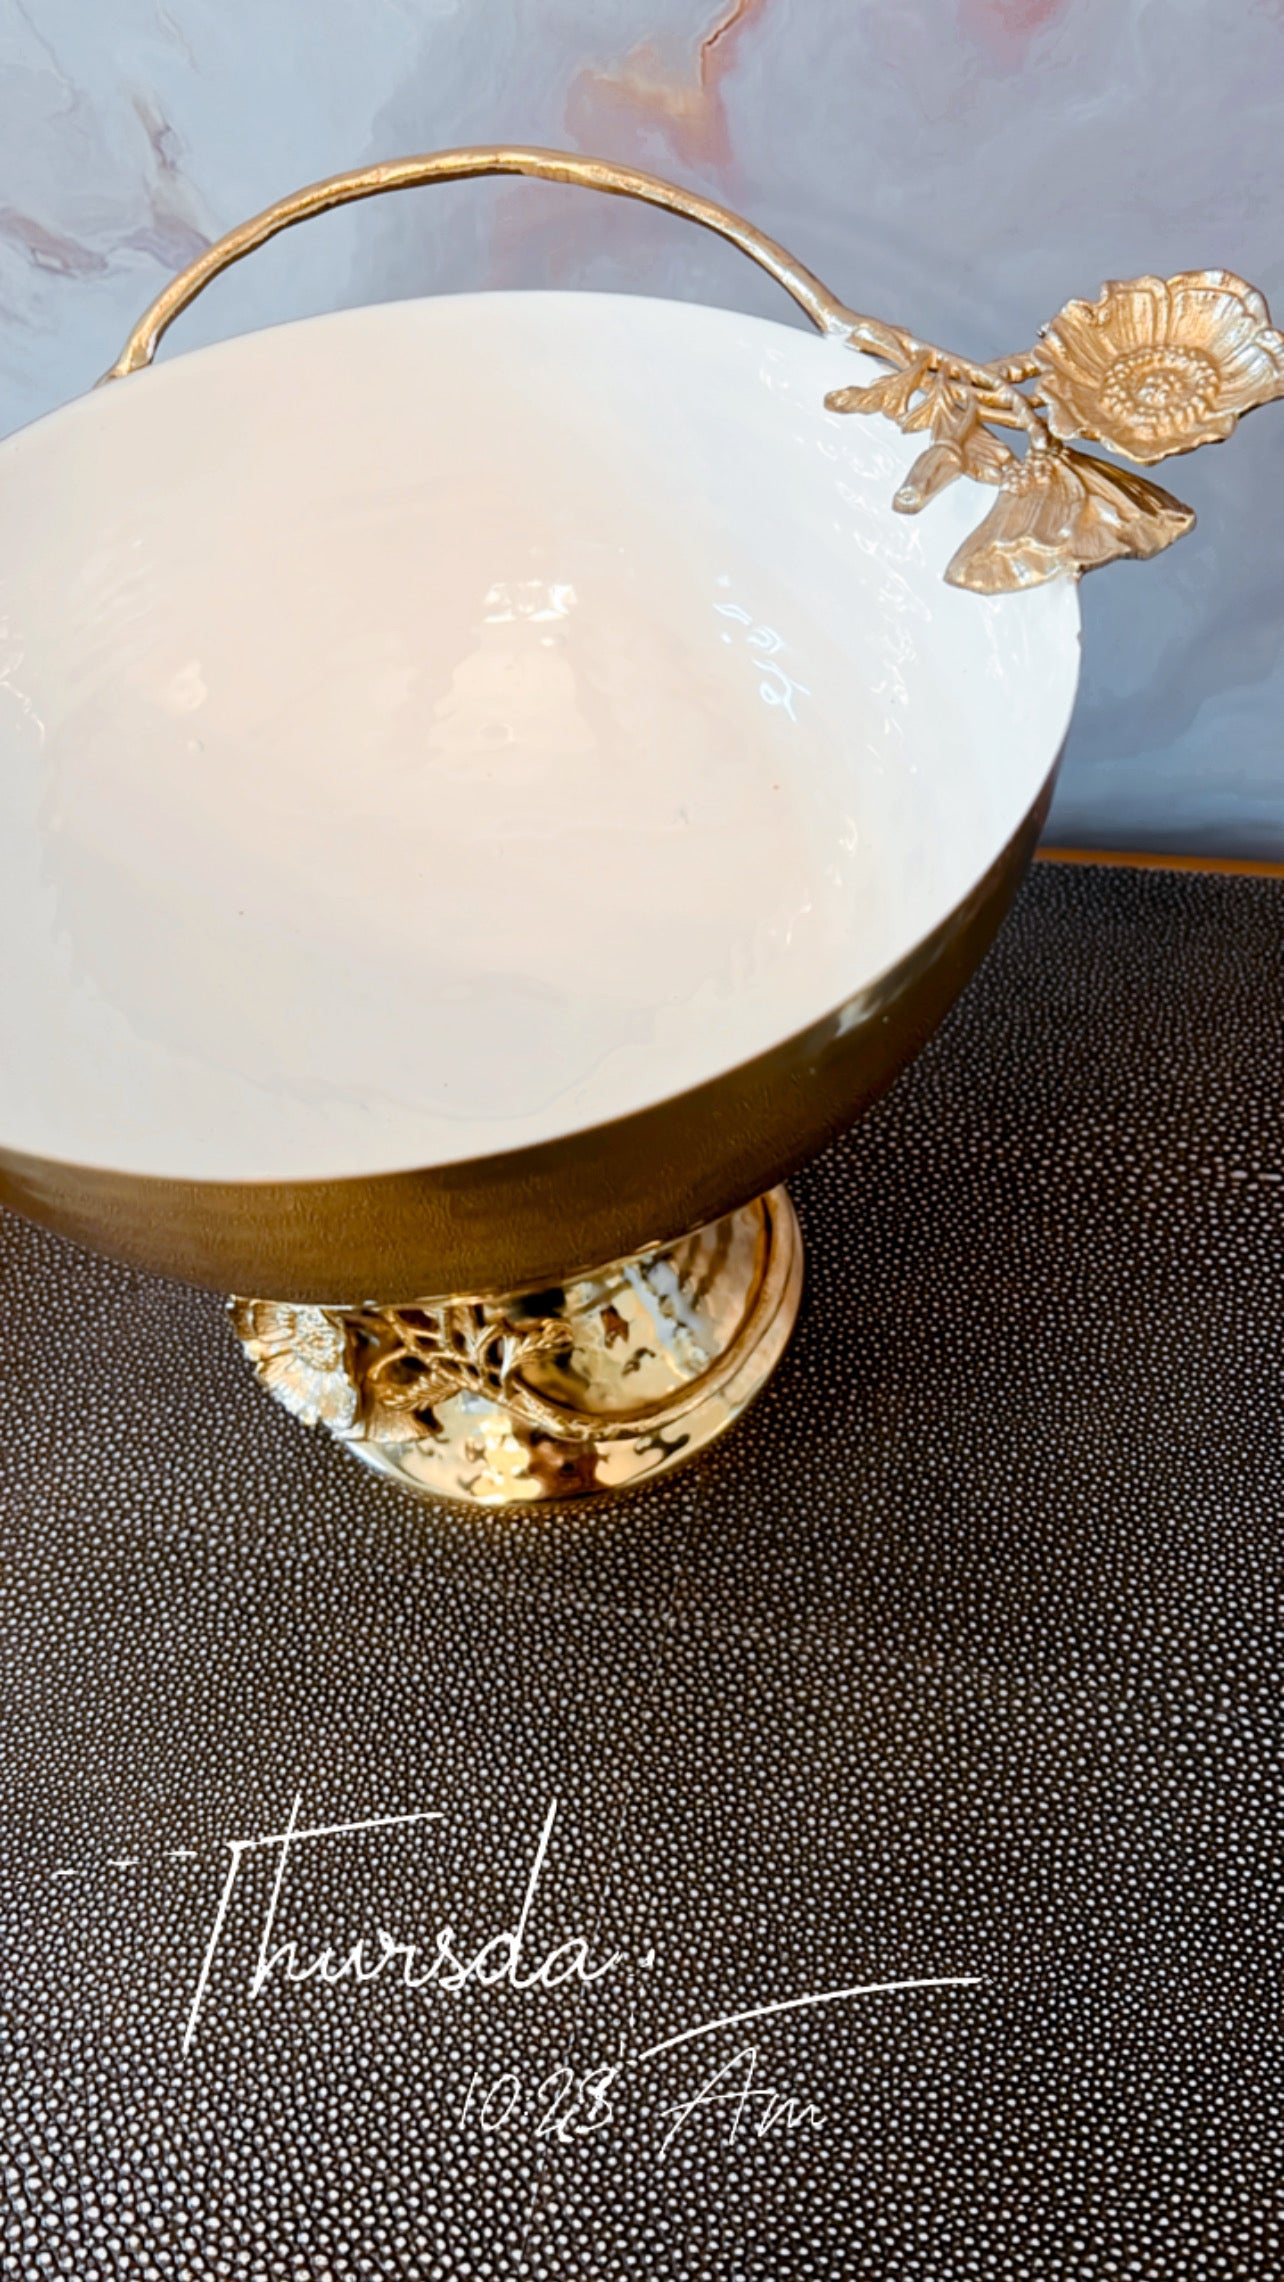 Gold and White Enamel Footed Bowl with Floral Details